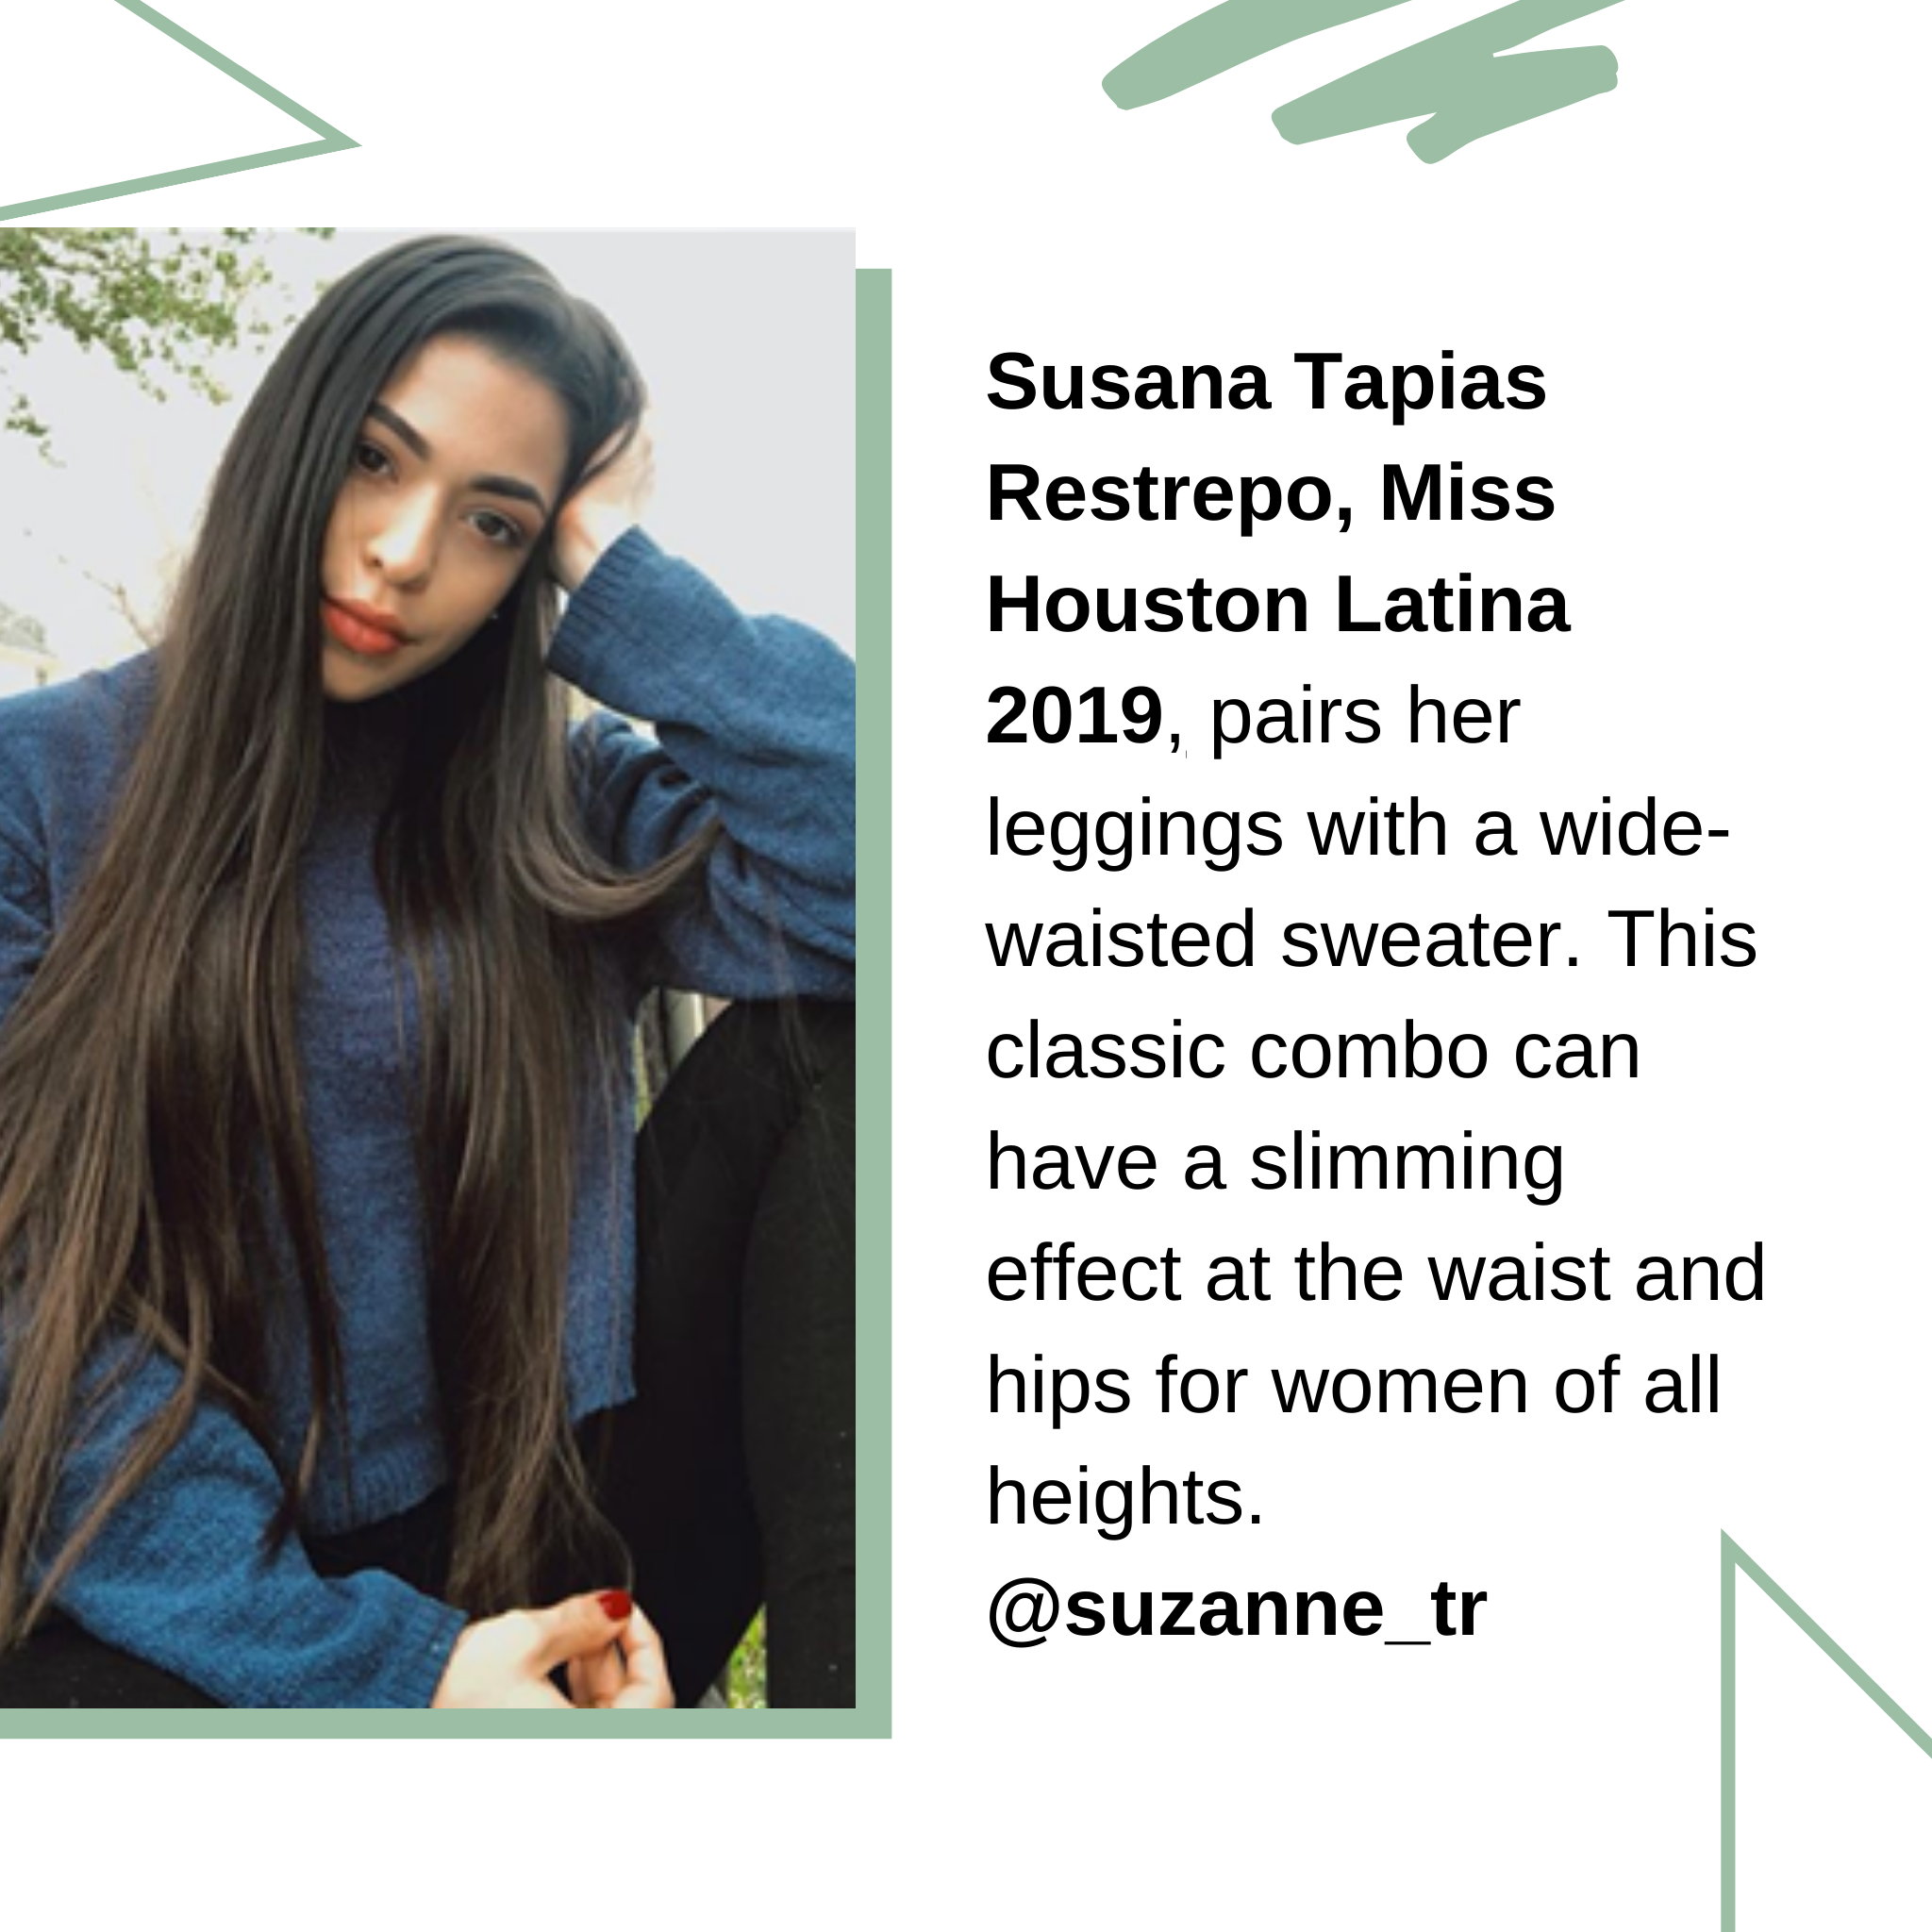 Susana Tapias Restrepo, Miss Houston Latina 2019, pairs her leggings with a wide-waisted sweater. This classic combo can have a slimming effect at the waist and hips for women of all heights